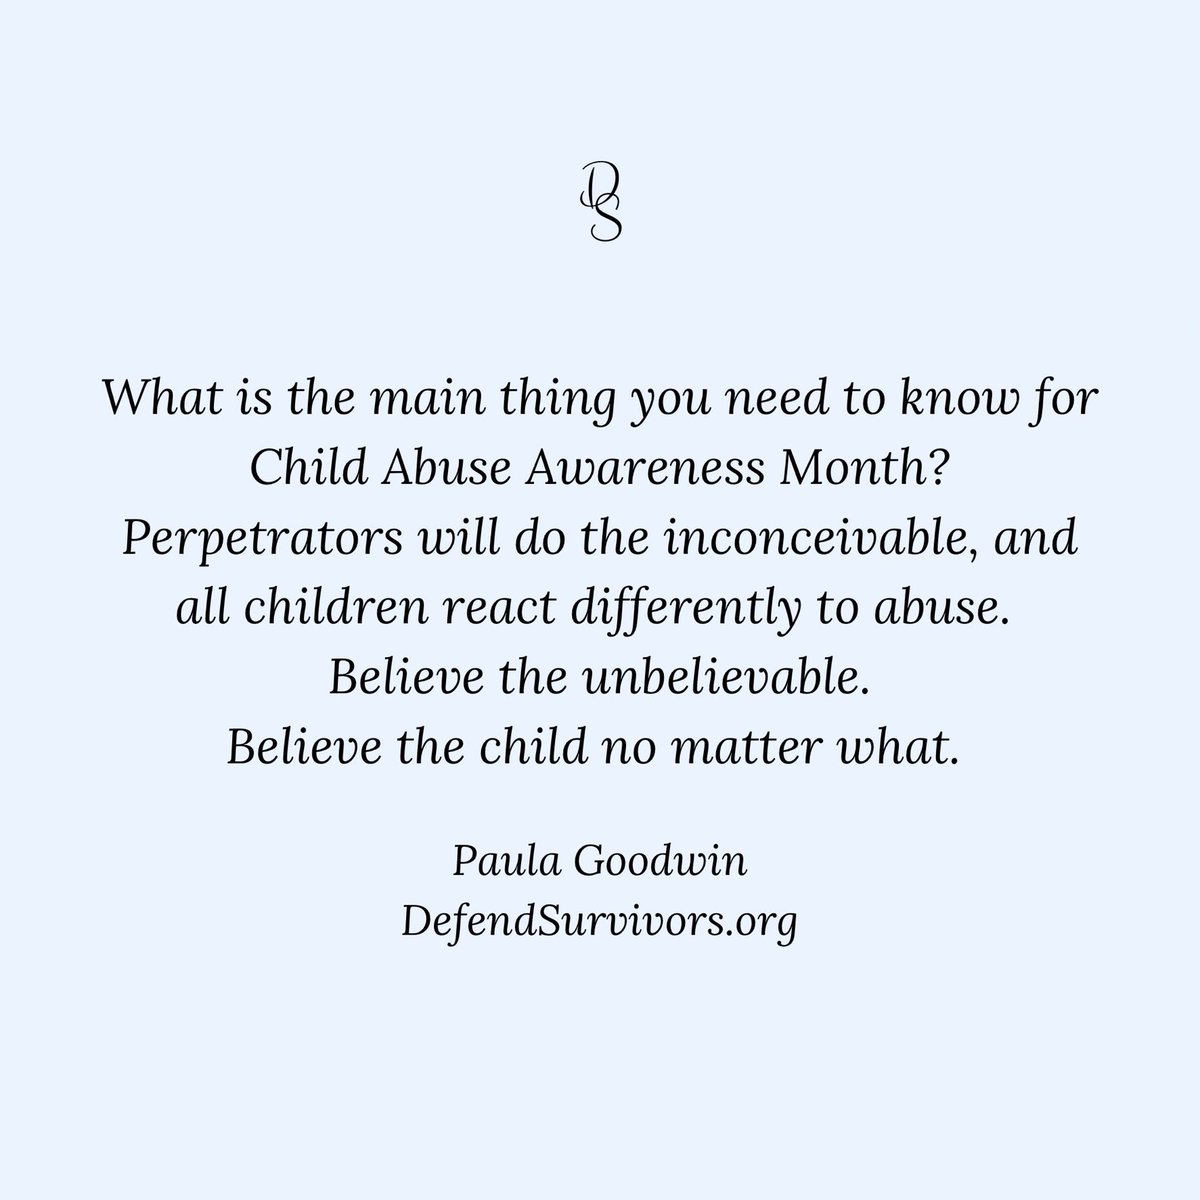 What is the main thing you need to know for Child Abuse Awareness Month? Perpetrators will do the inconceivable. All children react differently to abuse. Believe the unbelievable. Believe the child no. matter. what. #ChildAbusePreventionMonth #CAPM #SAAM #believethechild